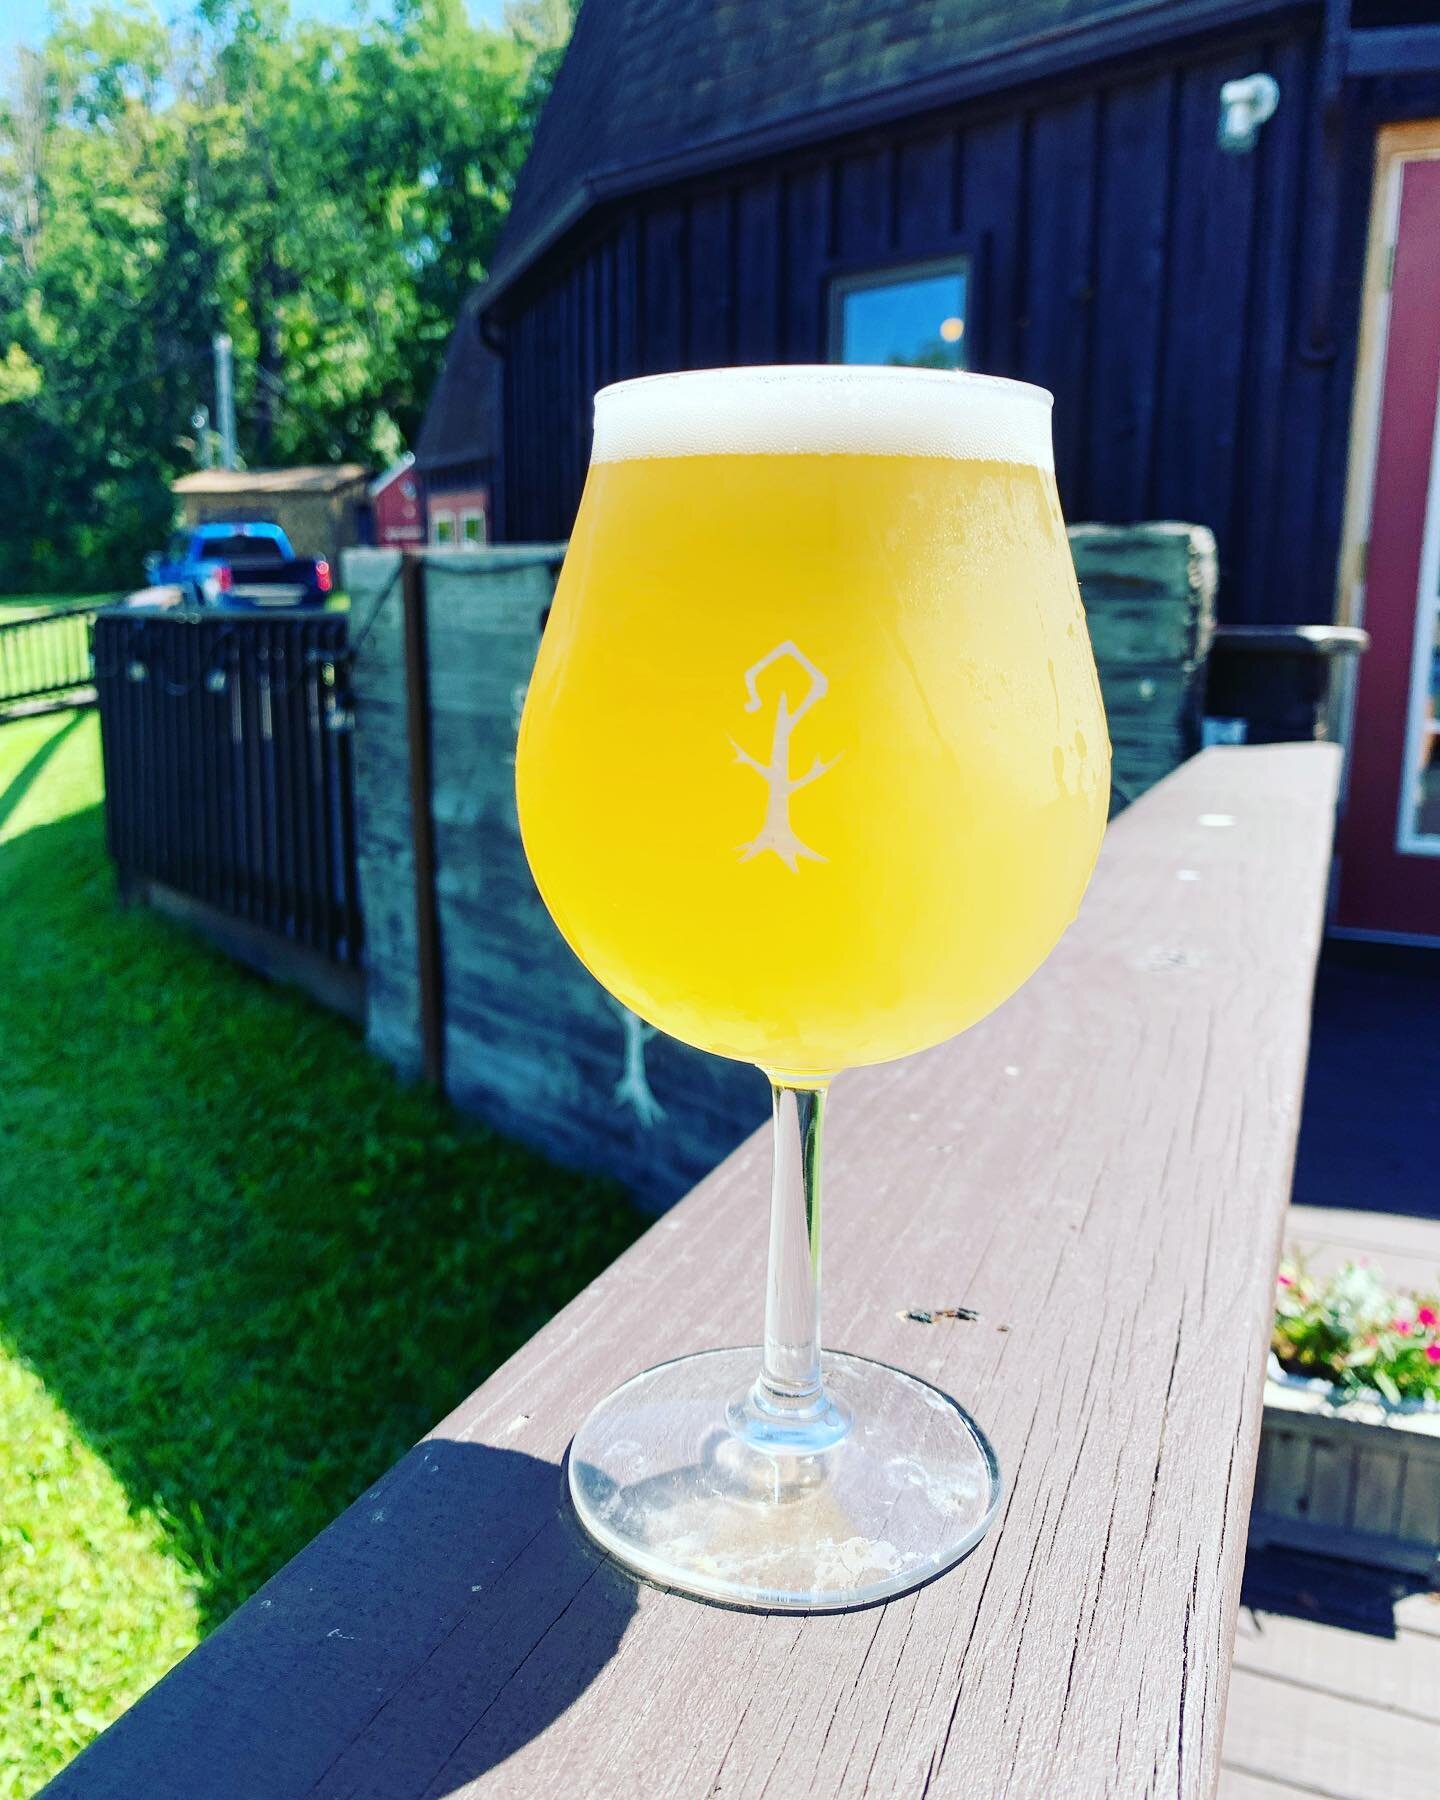 Lemon &amp; Ginger Saison is on tap!
Belgian saison conditioned on fresh ginger and fresh lemon&hellip;delightfully refreshing. 6.5% ABV

Live music with Trevor Donlon from 6-8! @tj_donlon 

The Bristol Fire Department will be here at 4:00 doing a fu